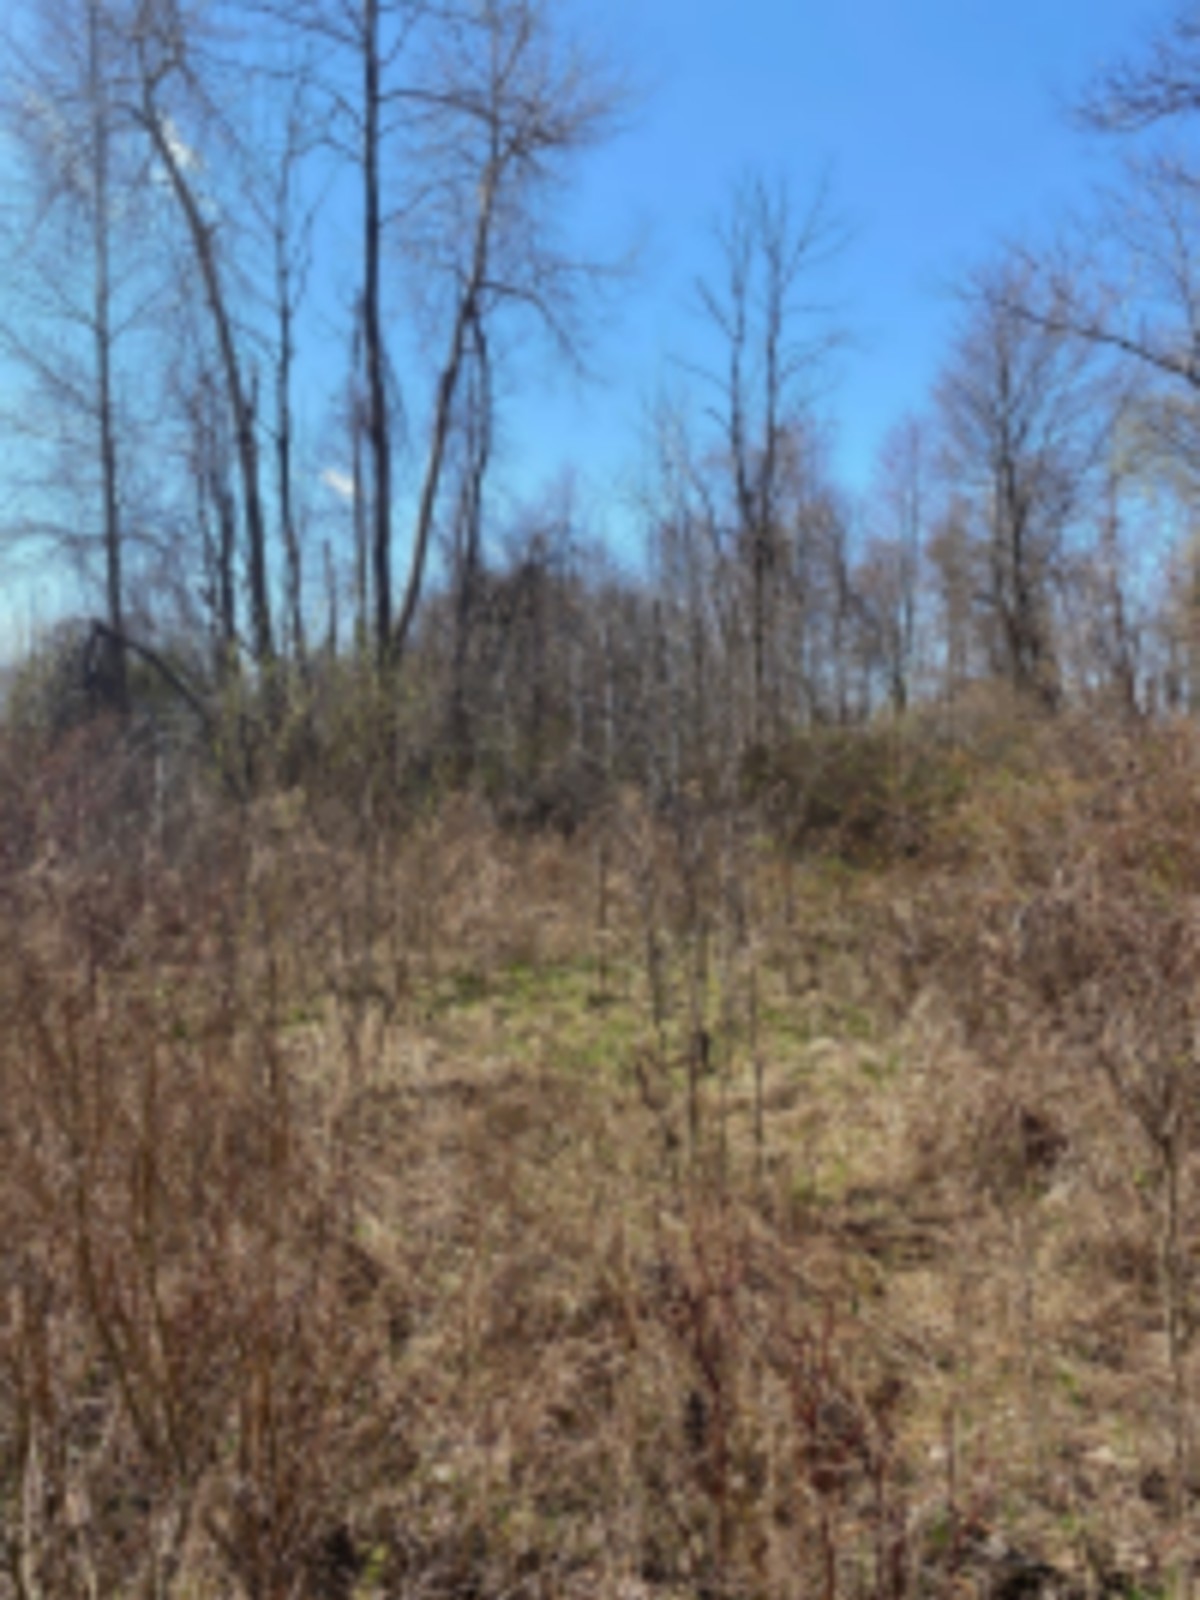 BIG BUCK LEASING in Sanilac County, MI images 5